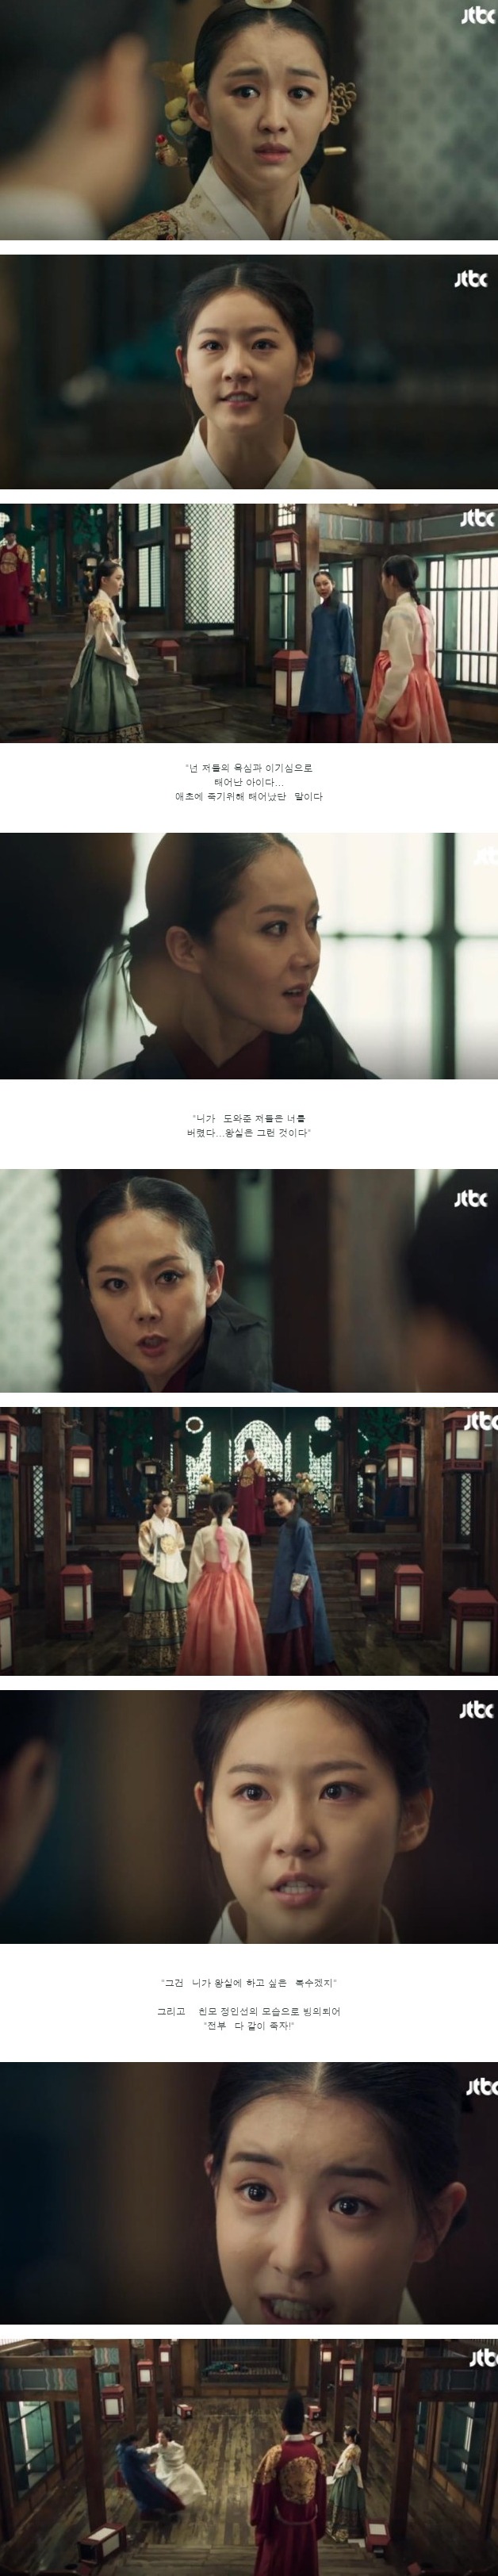 episodes 17 and 18 captures for the Korean drama 'Mirror of the Witch'